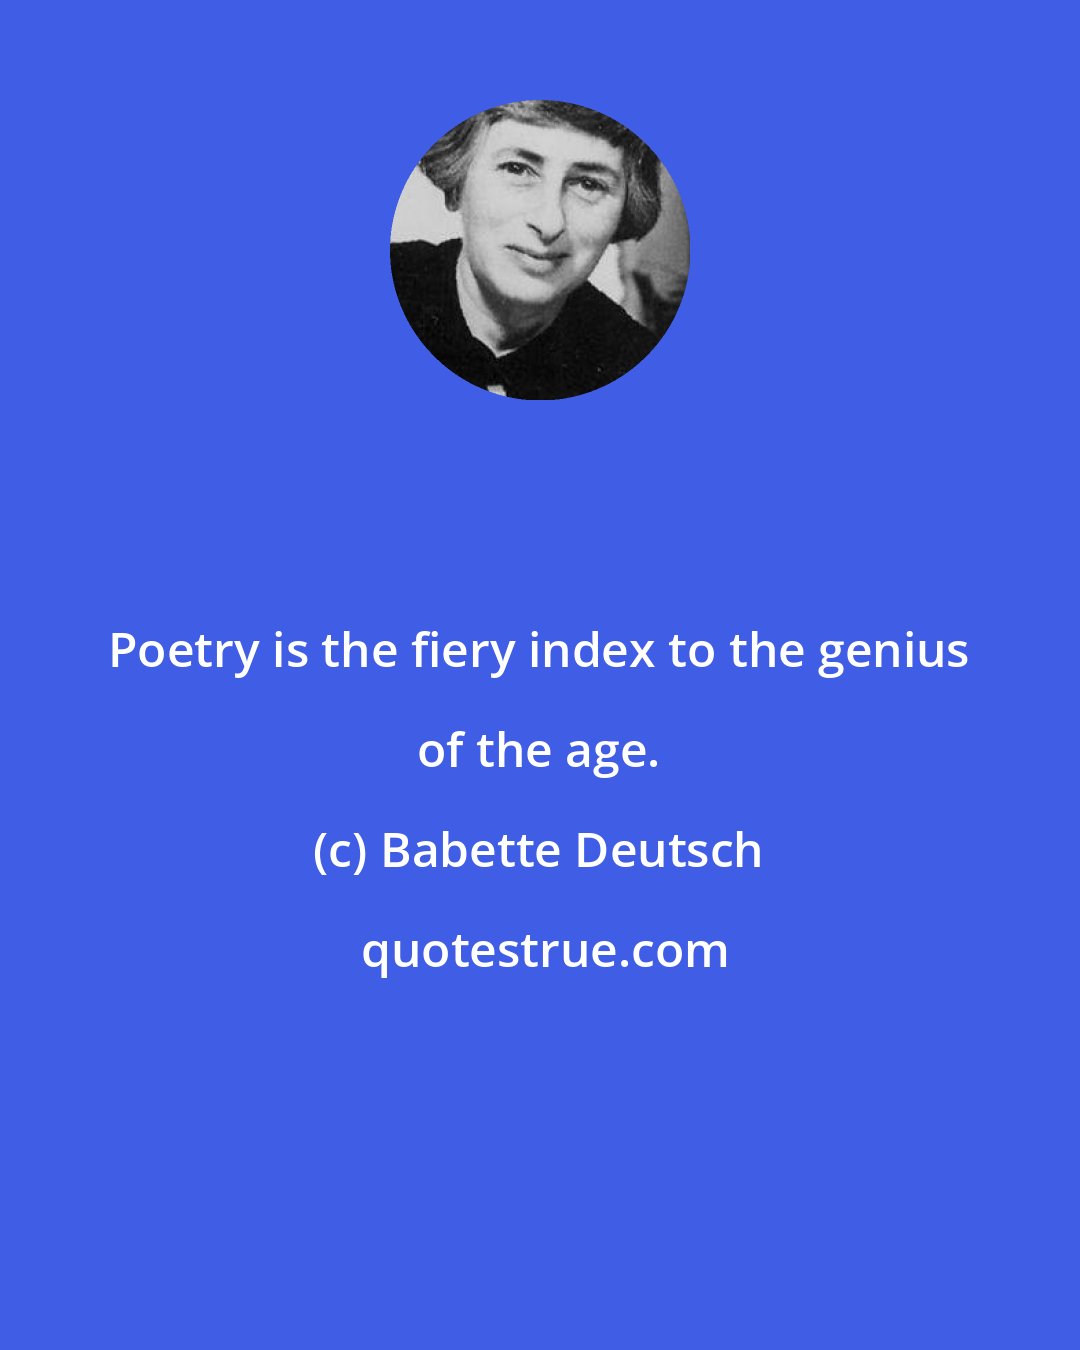 Babette Deutsch: Poetry is the fiery index to the genius of the age.